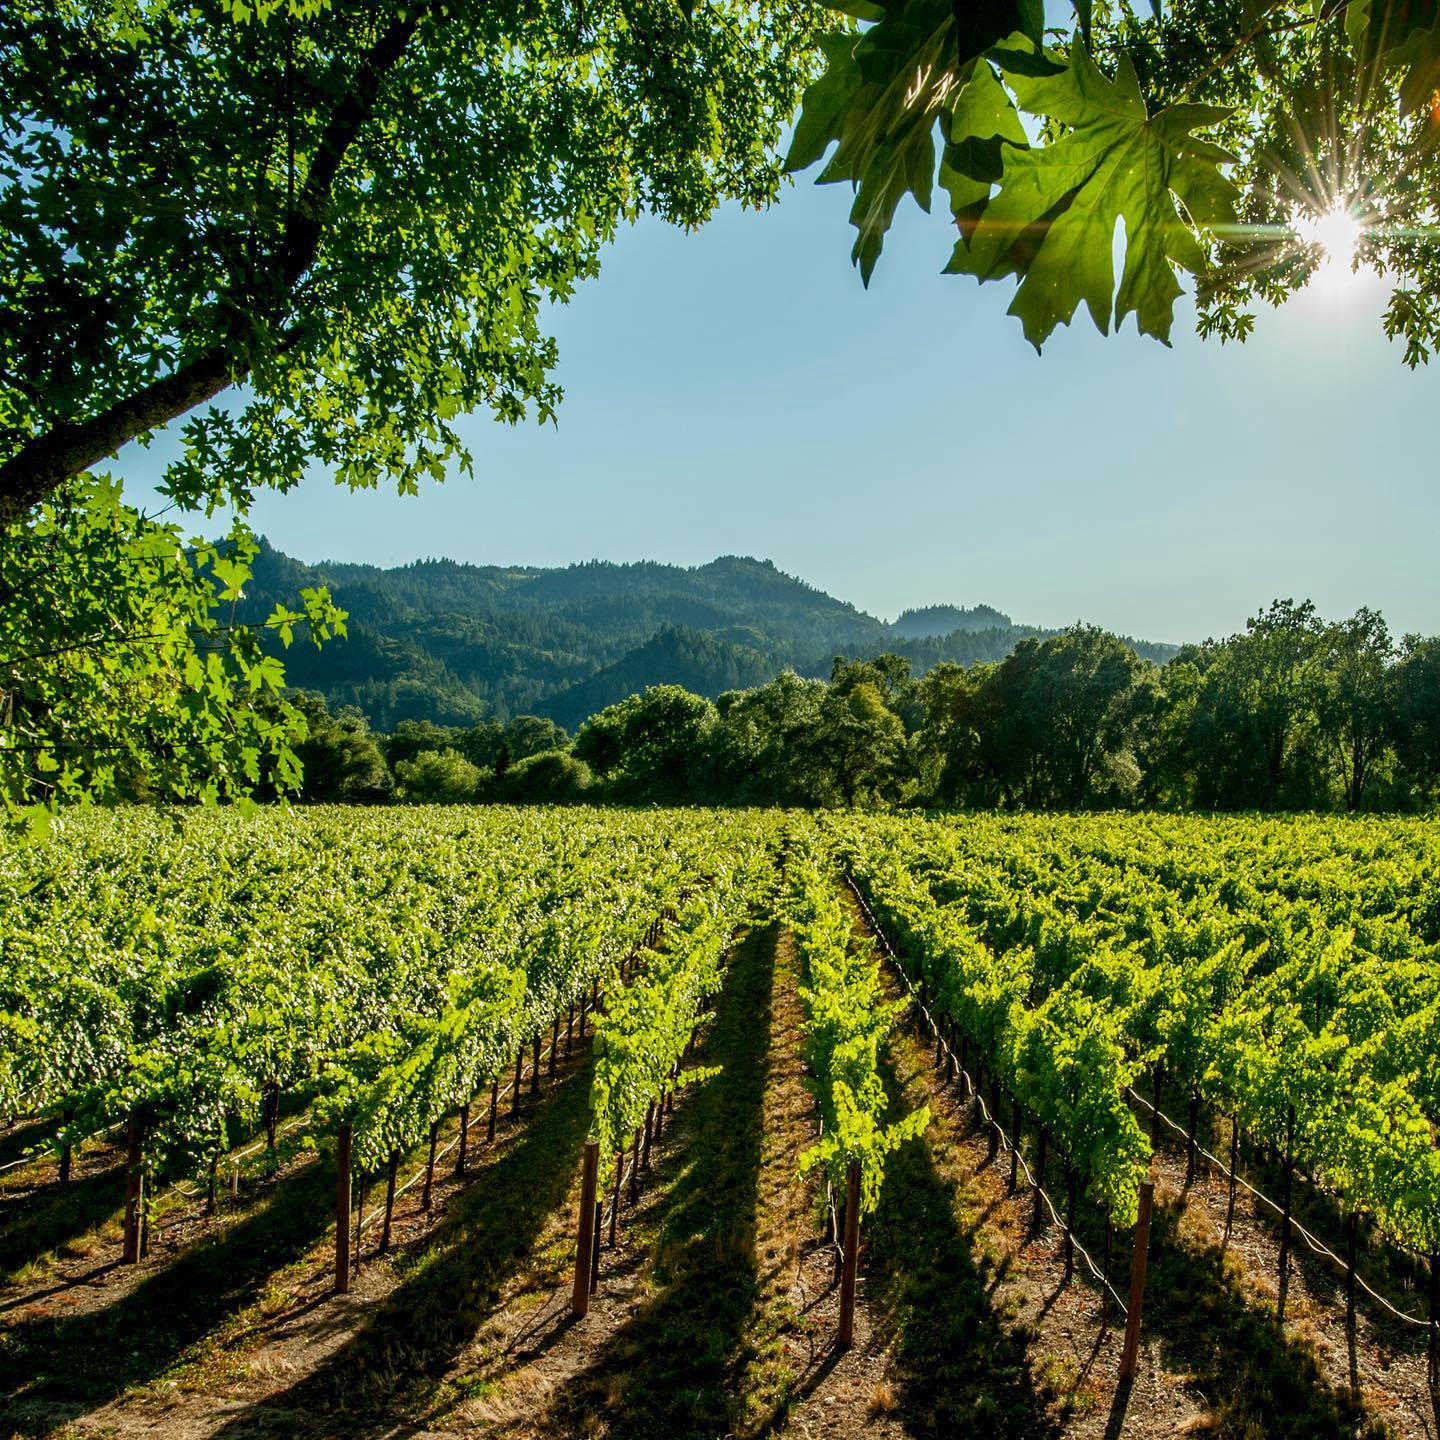 Ginger Martin + Co. - Best known as wine country, Napa Valley is one of the most popular destination